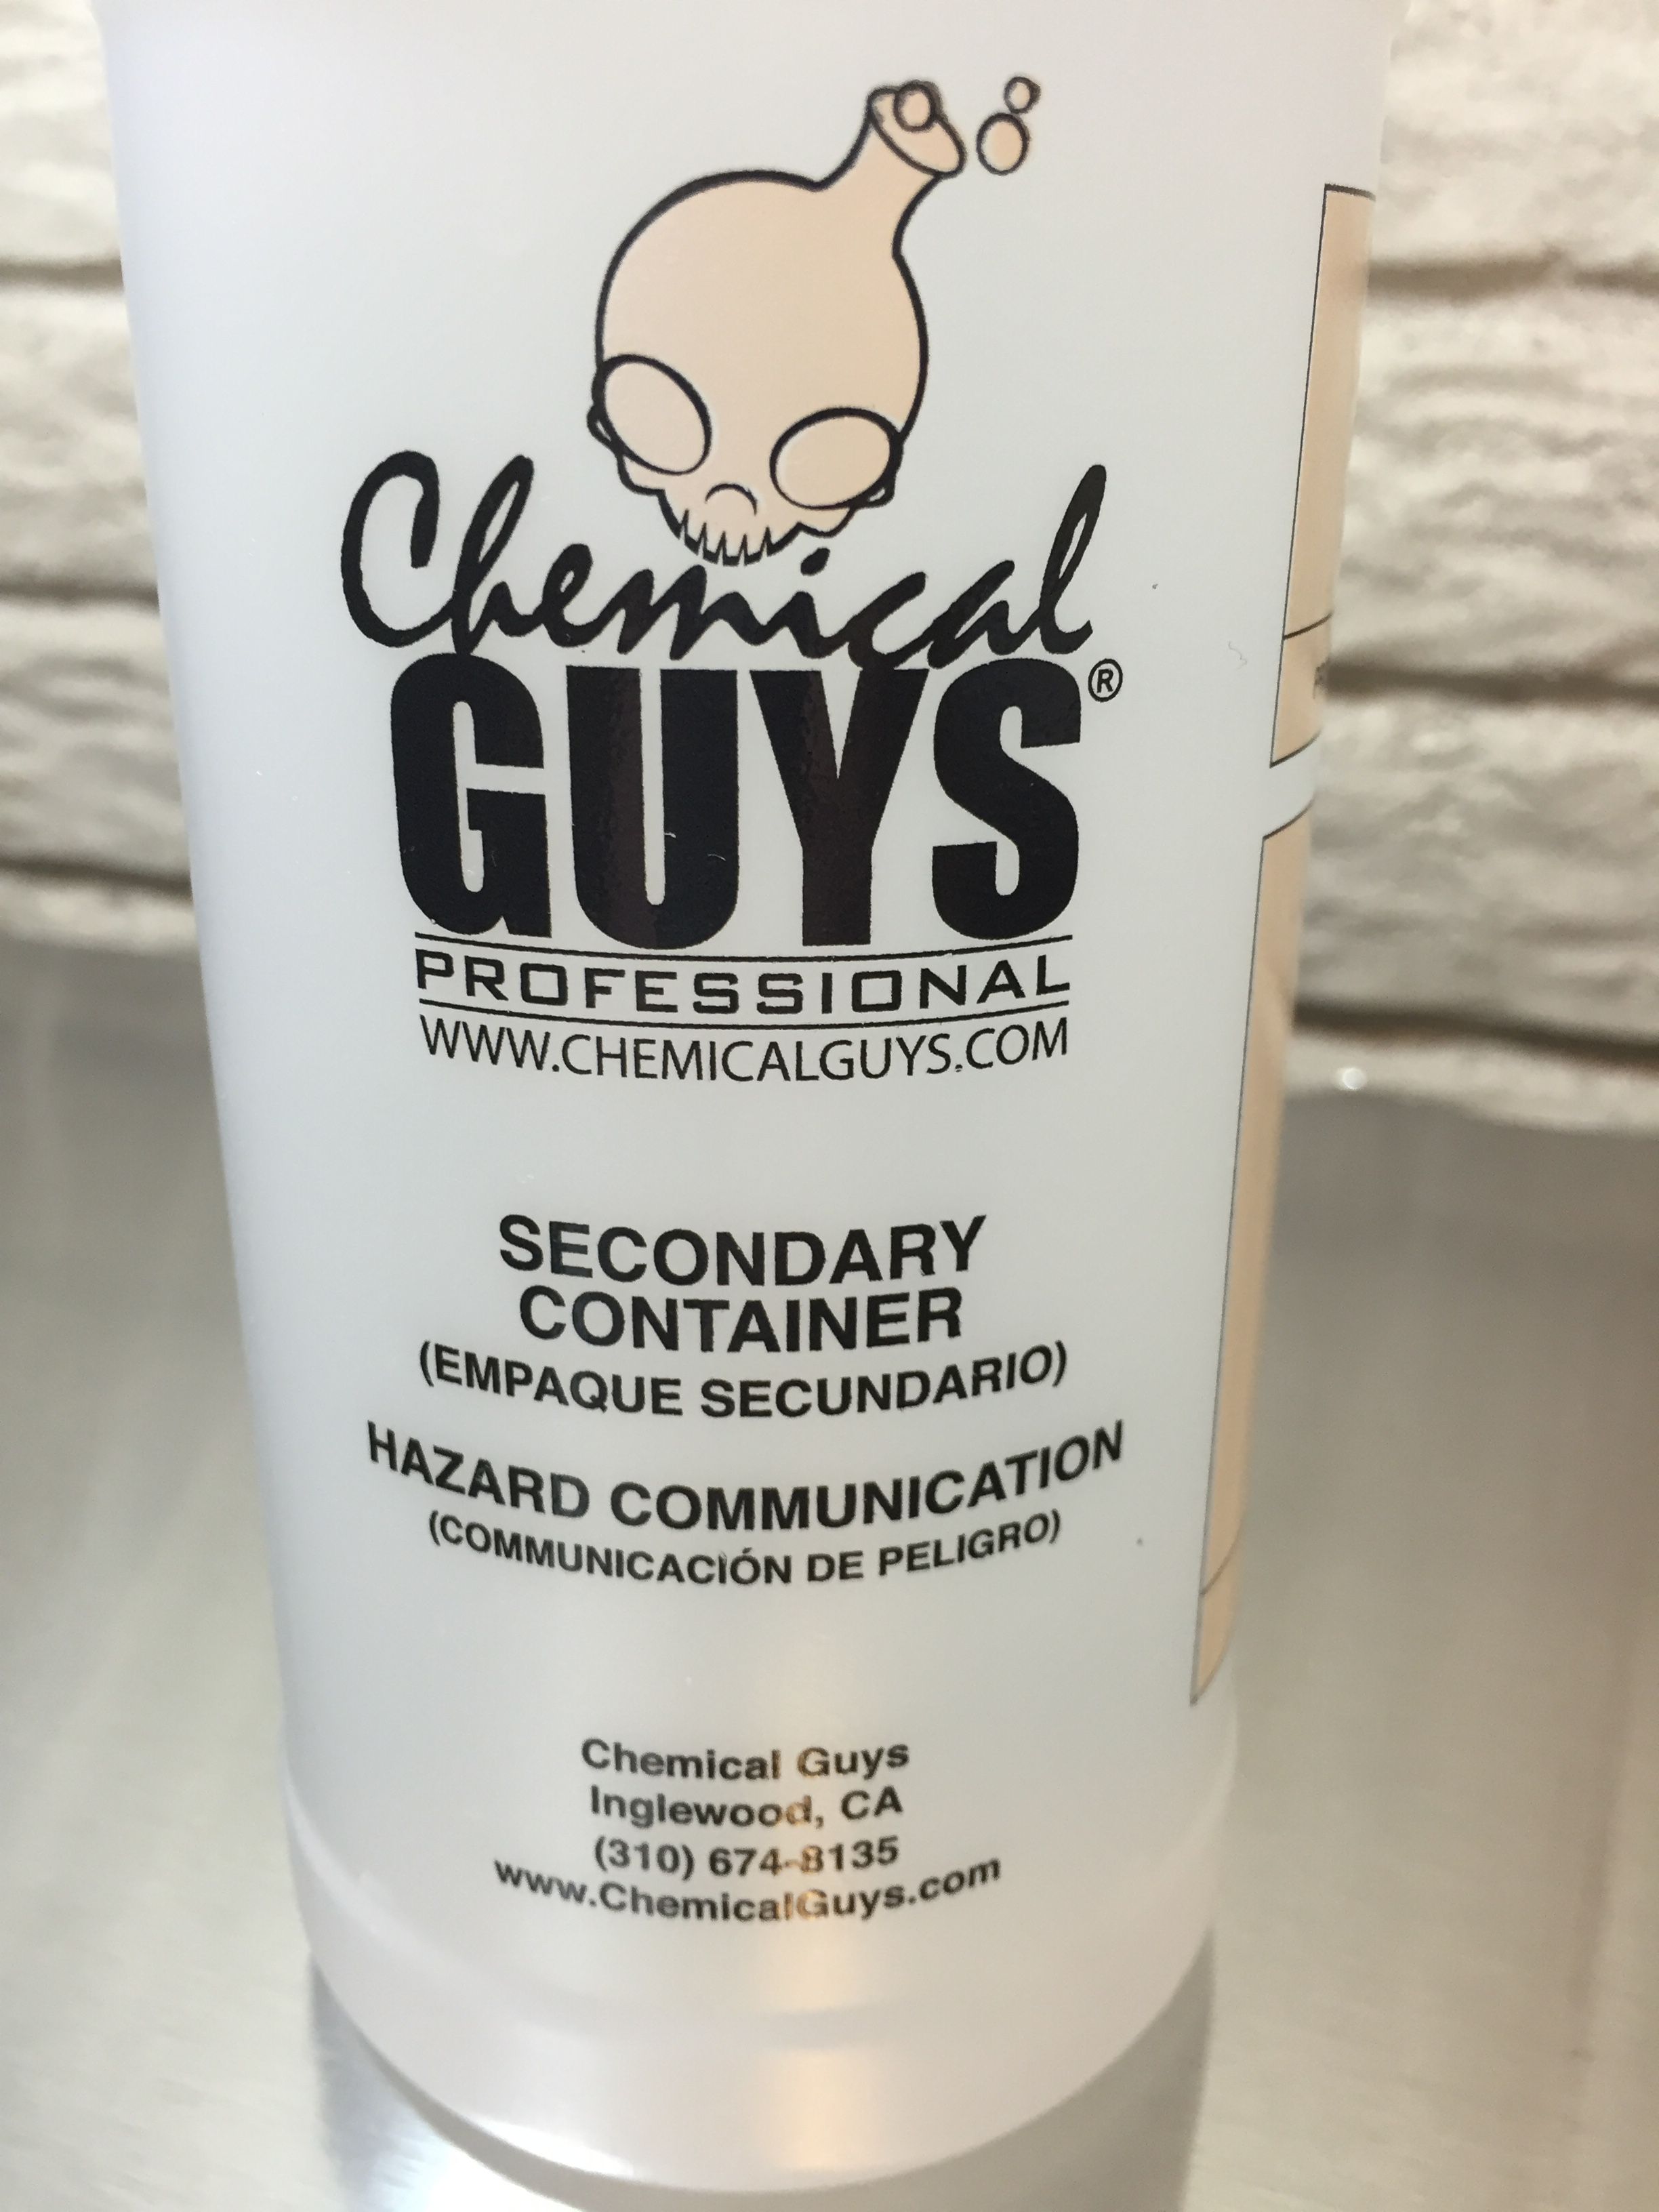 Hands On Review: Chemical Guys Chemical Resistant Heavy Duty